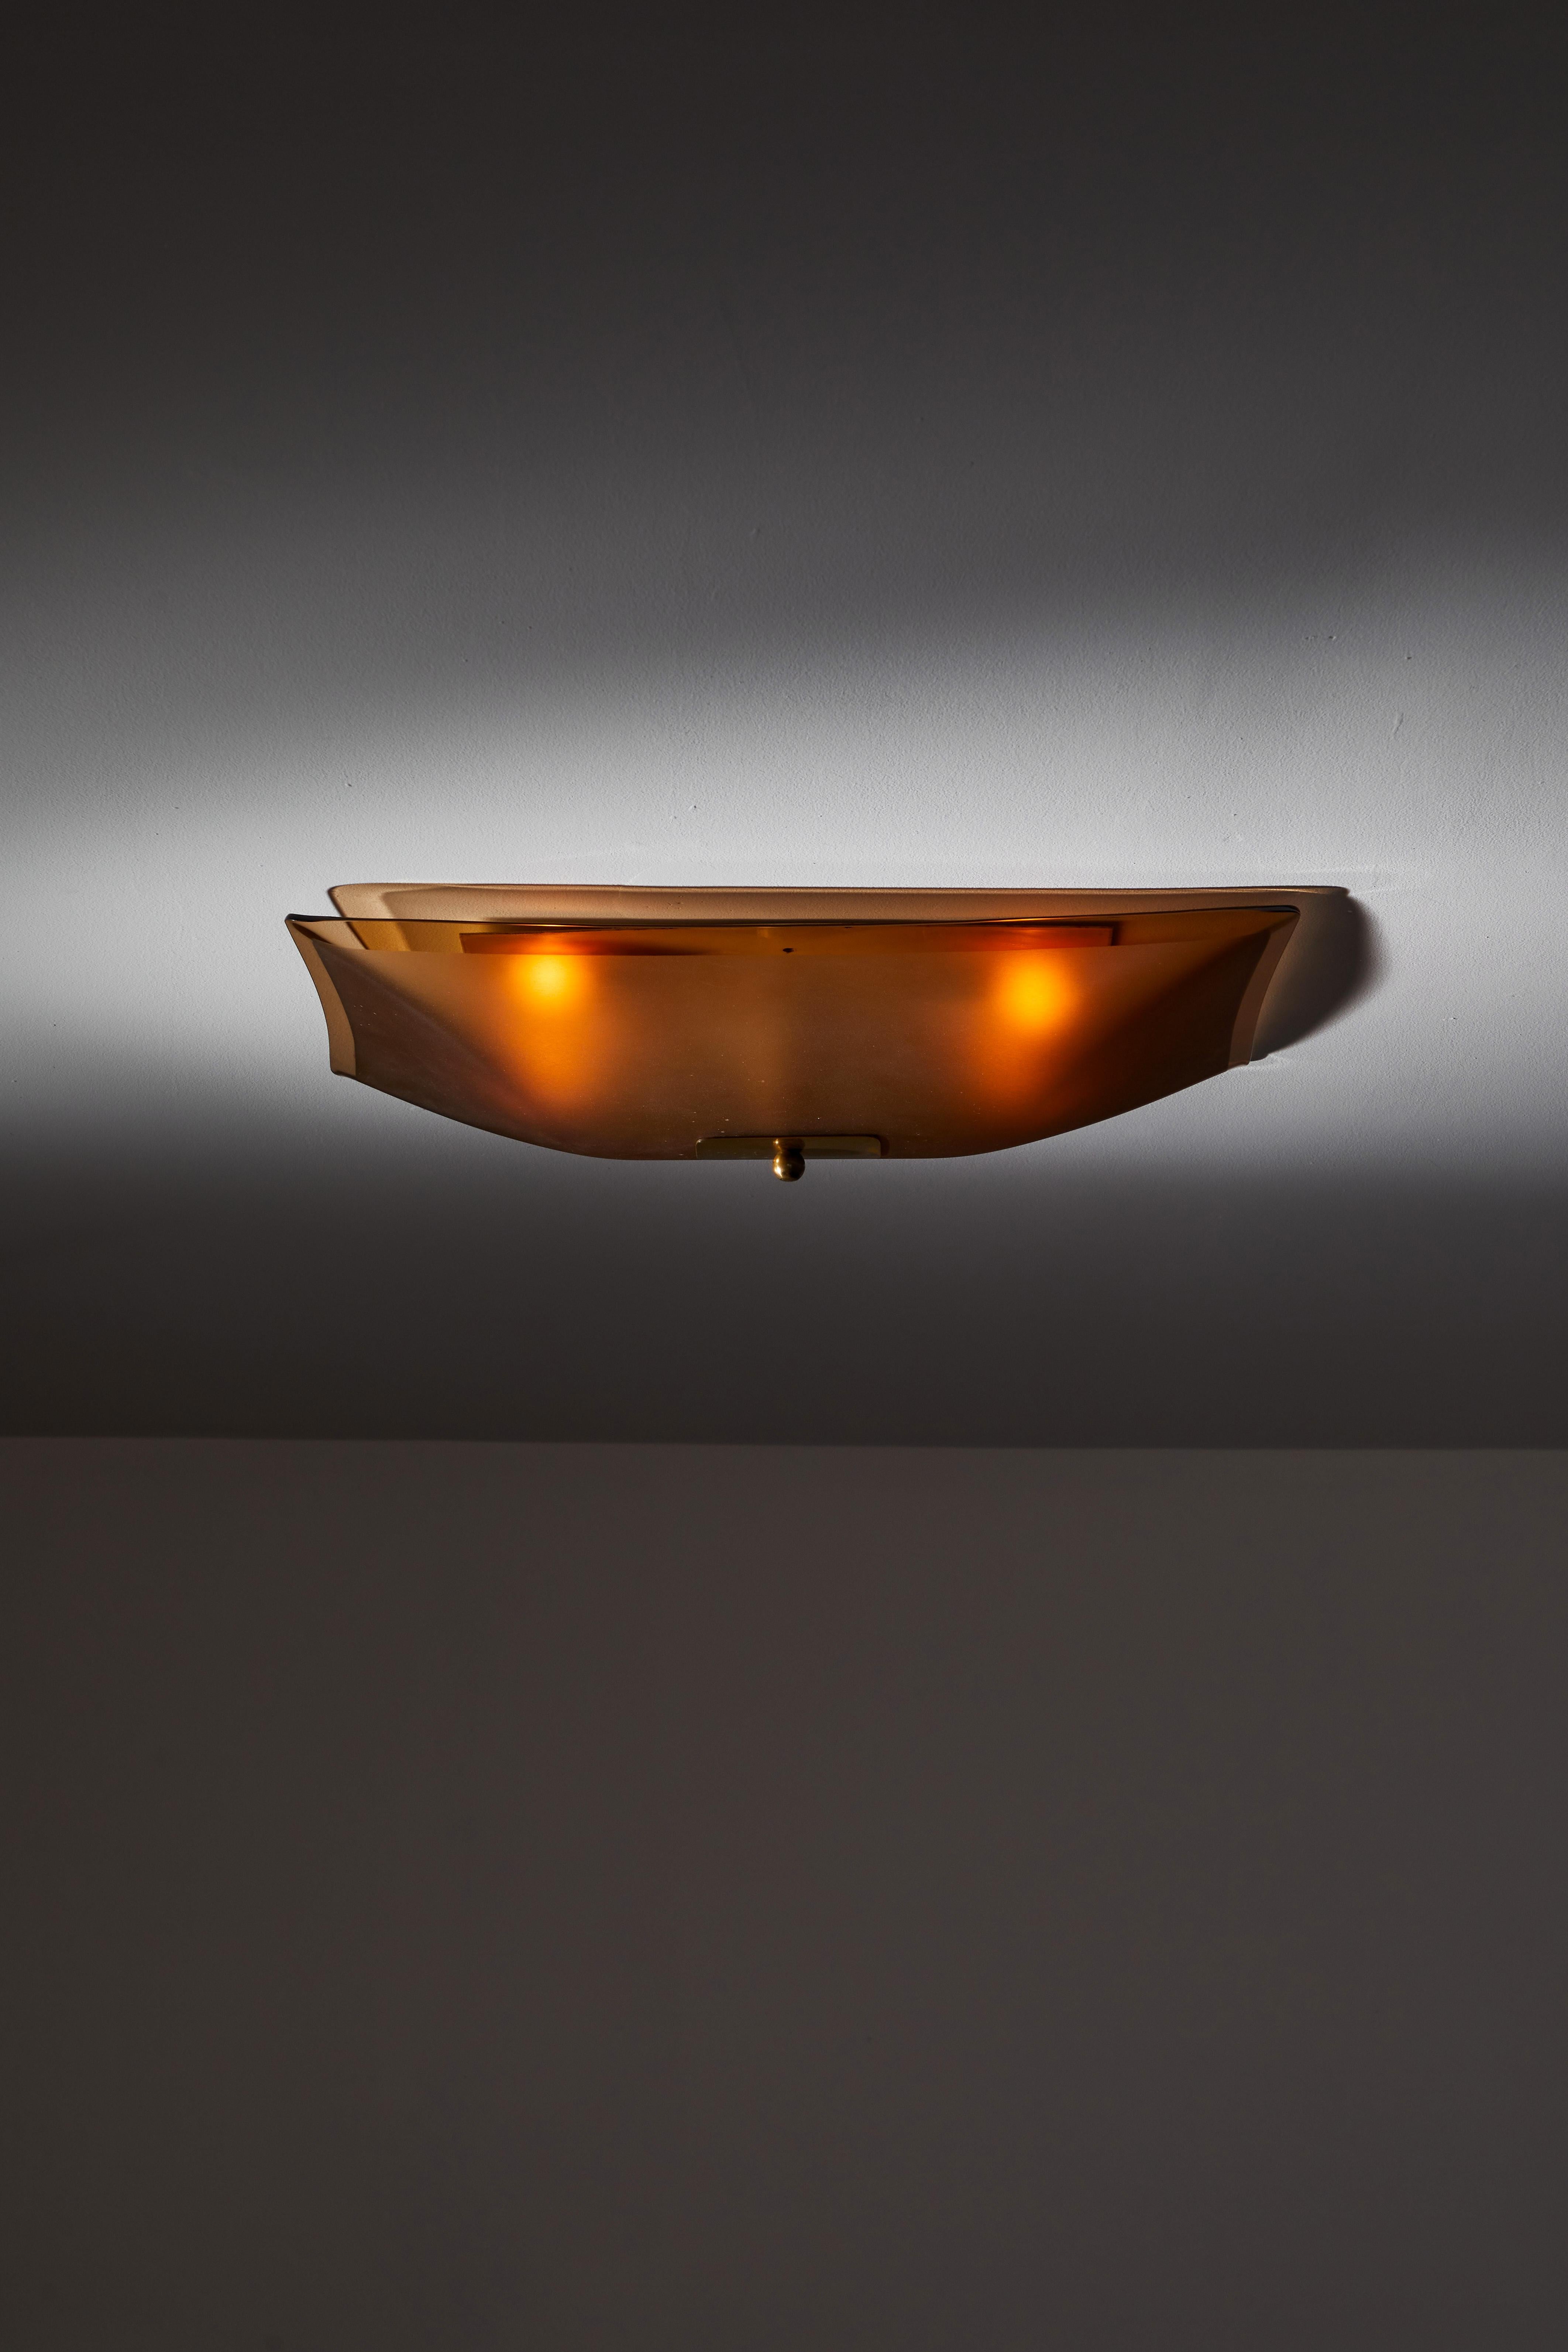 Flush mount ceiling light by Fontana Arte. Manufactured in Italy, circa 1950s. Glass, brass. Rewired for U.S. standards. This fixture has four sockets. We recommend four E27 25-60w maximum candelabra bulbs. Bulbs are provided as a one time courtesy